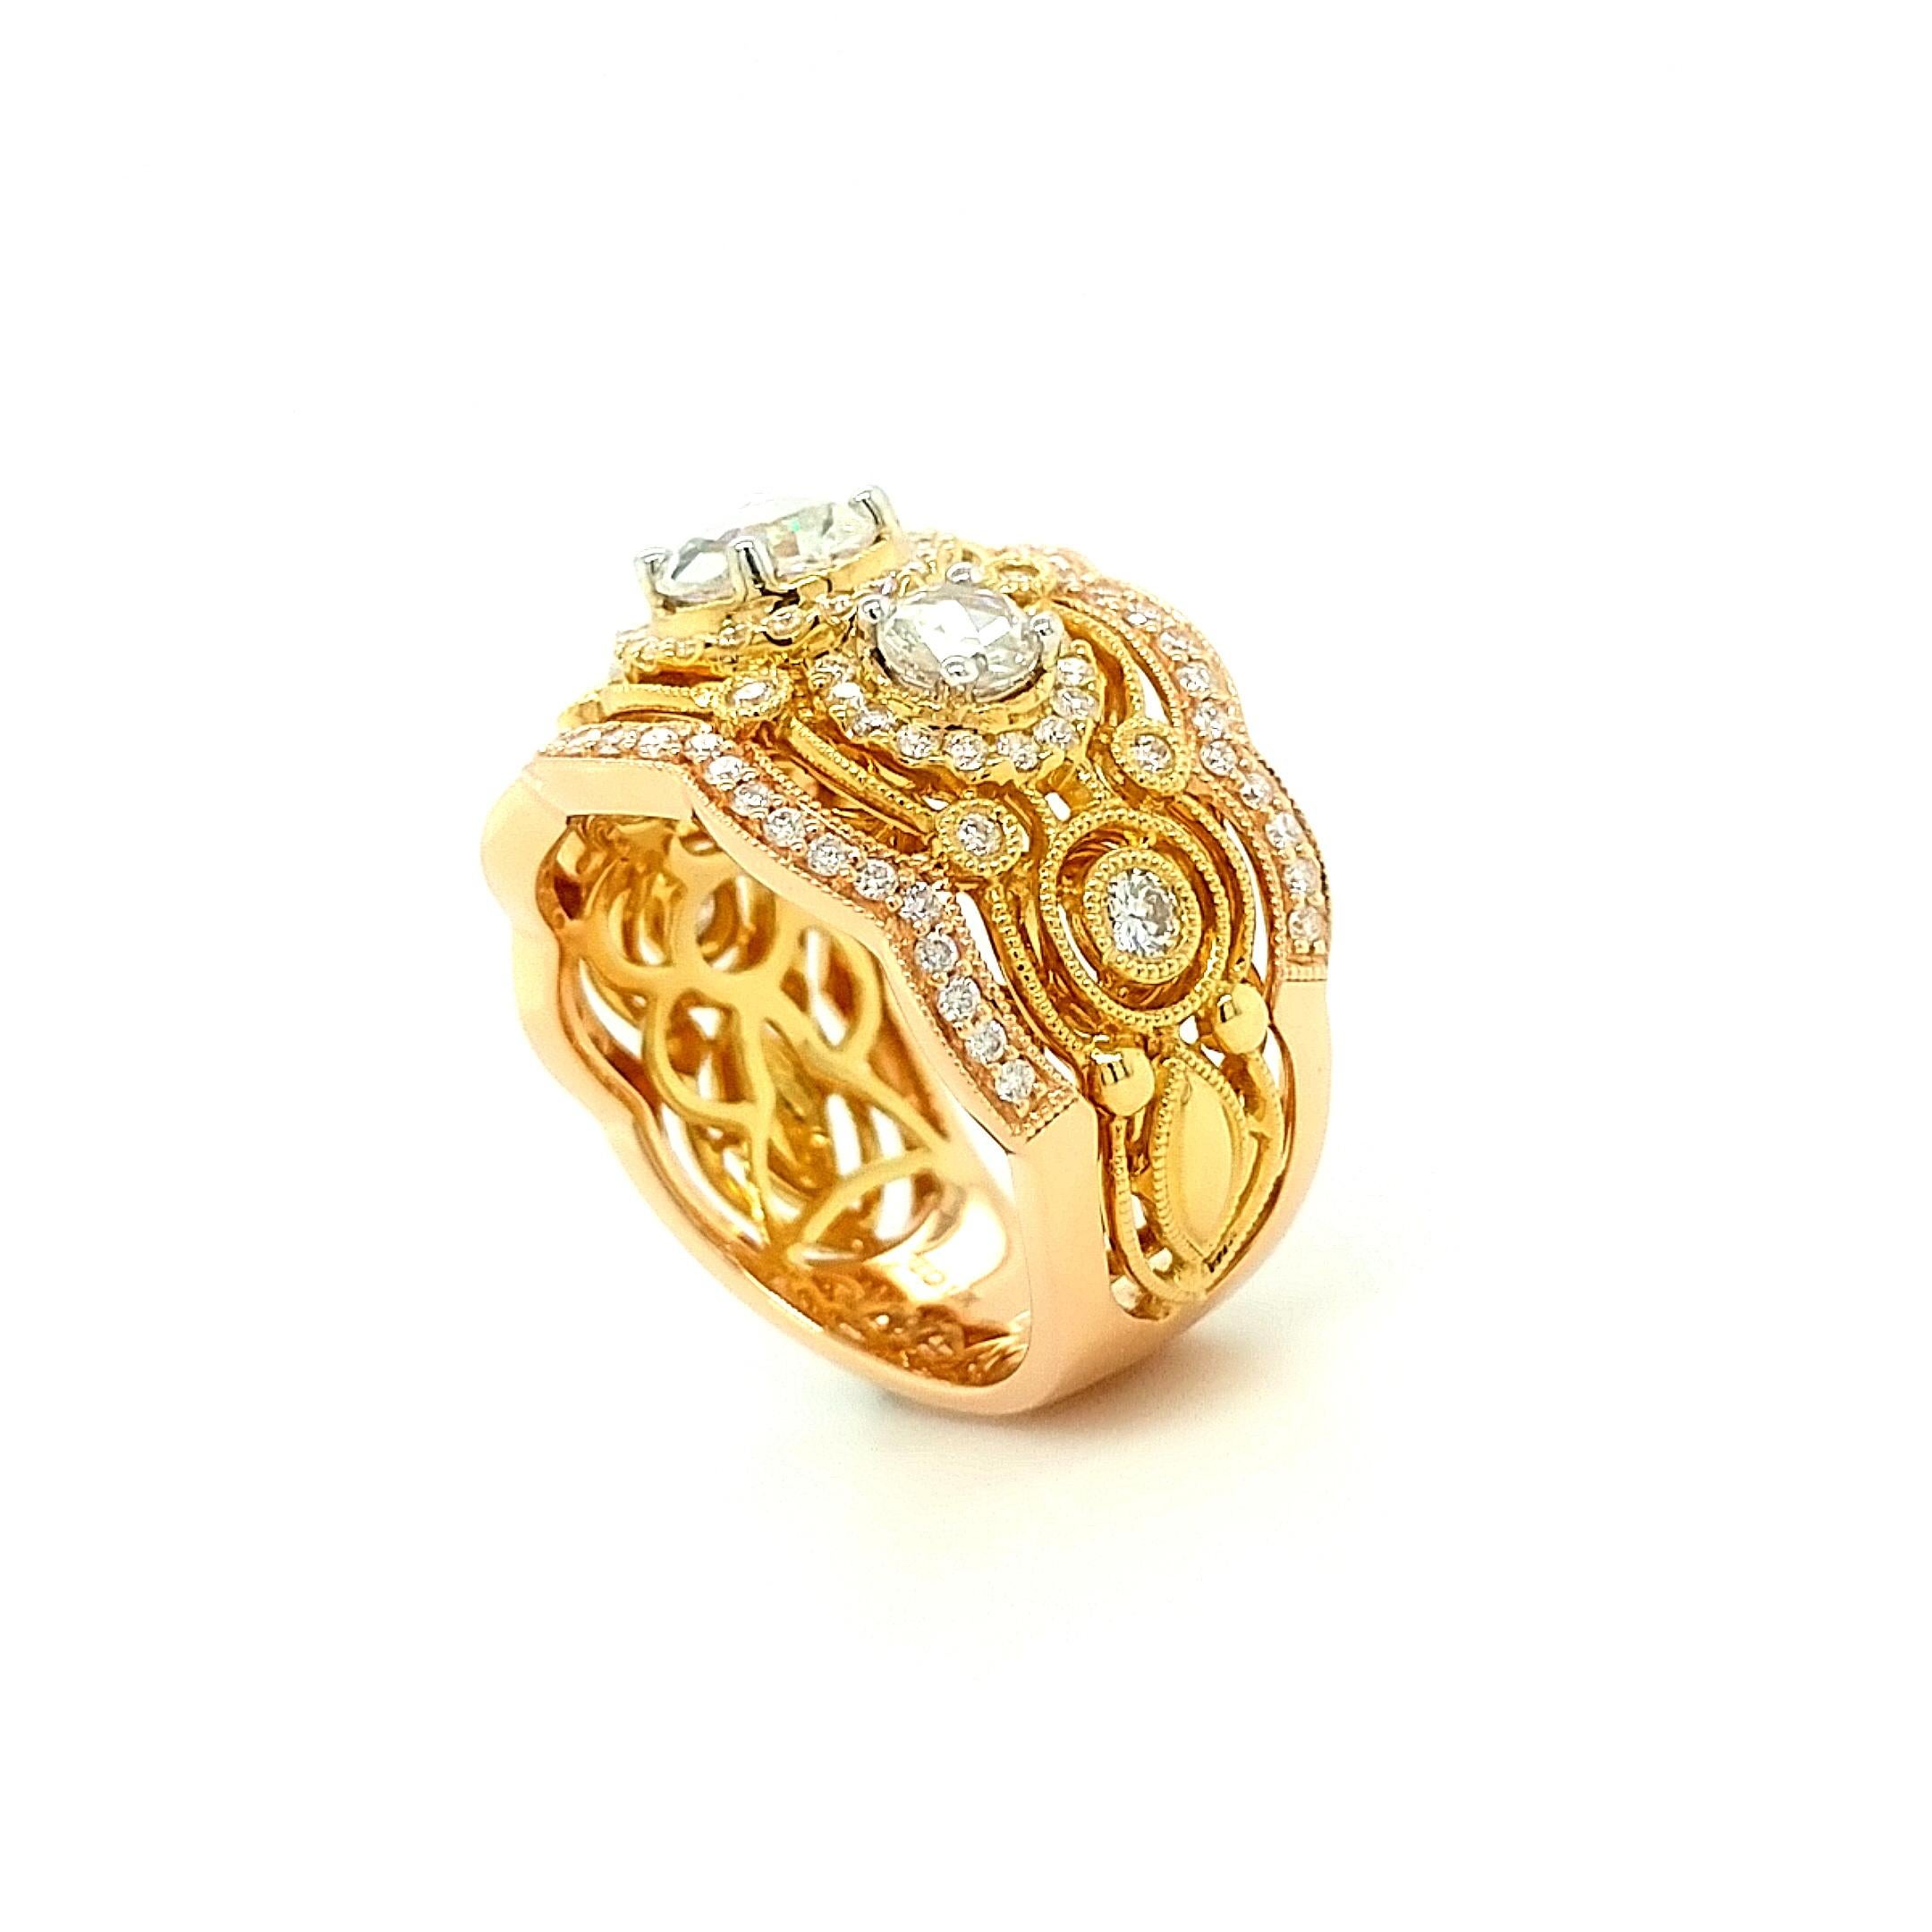 A beautiful three stone 18Kt White, Yellow, and Rose Gold cocktail ring set with 1.89 carats of round brilliant and rose cut diamonds. There are 0.77 carats of round brilliant cut diamonds and three rose cut diamonds weighing a total of 1.12 carats.